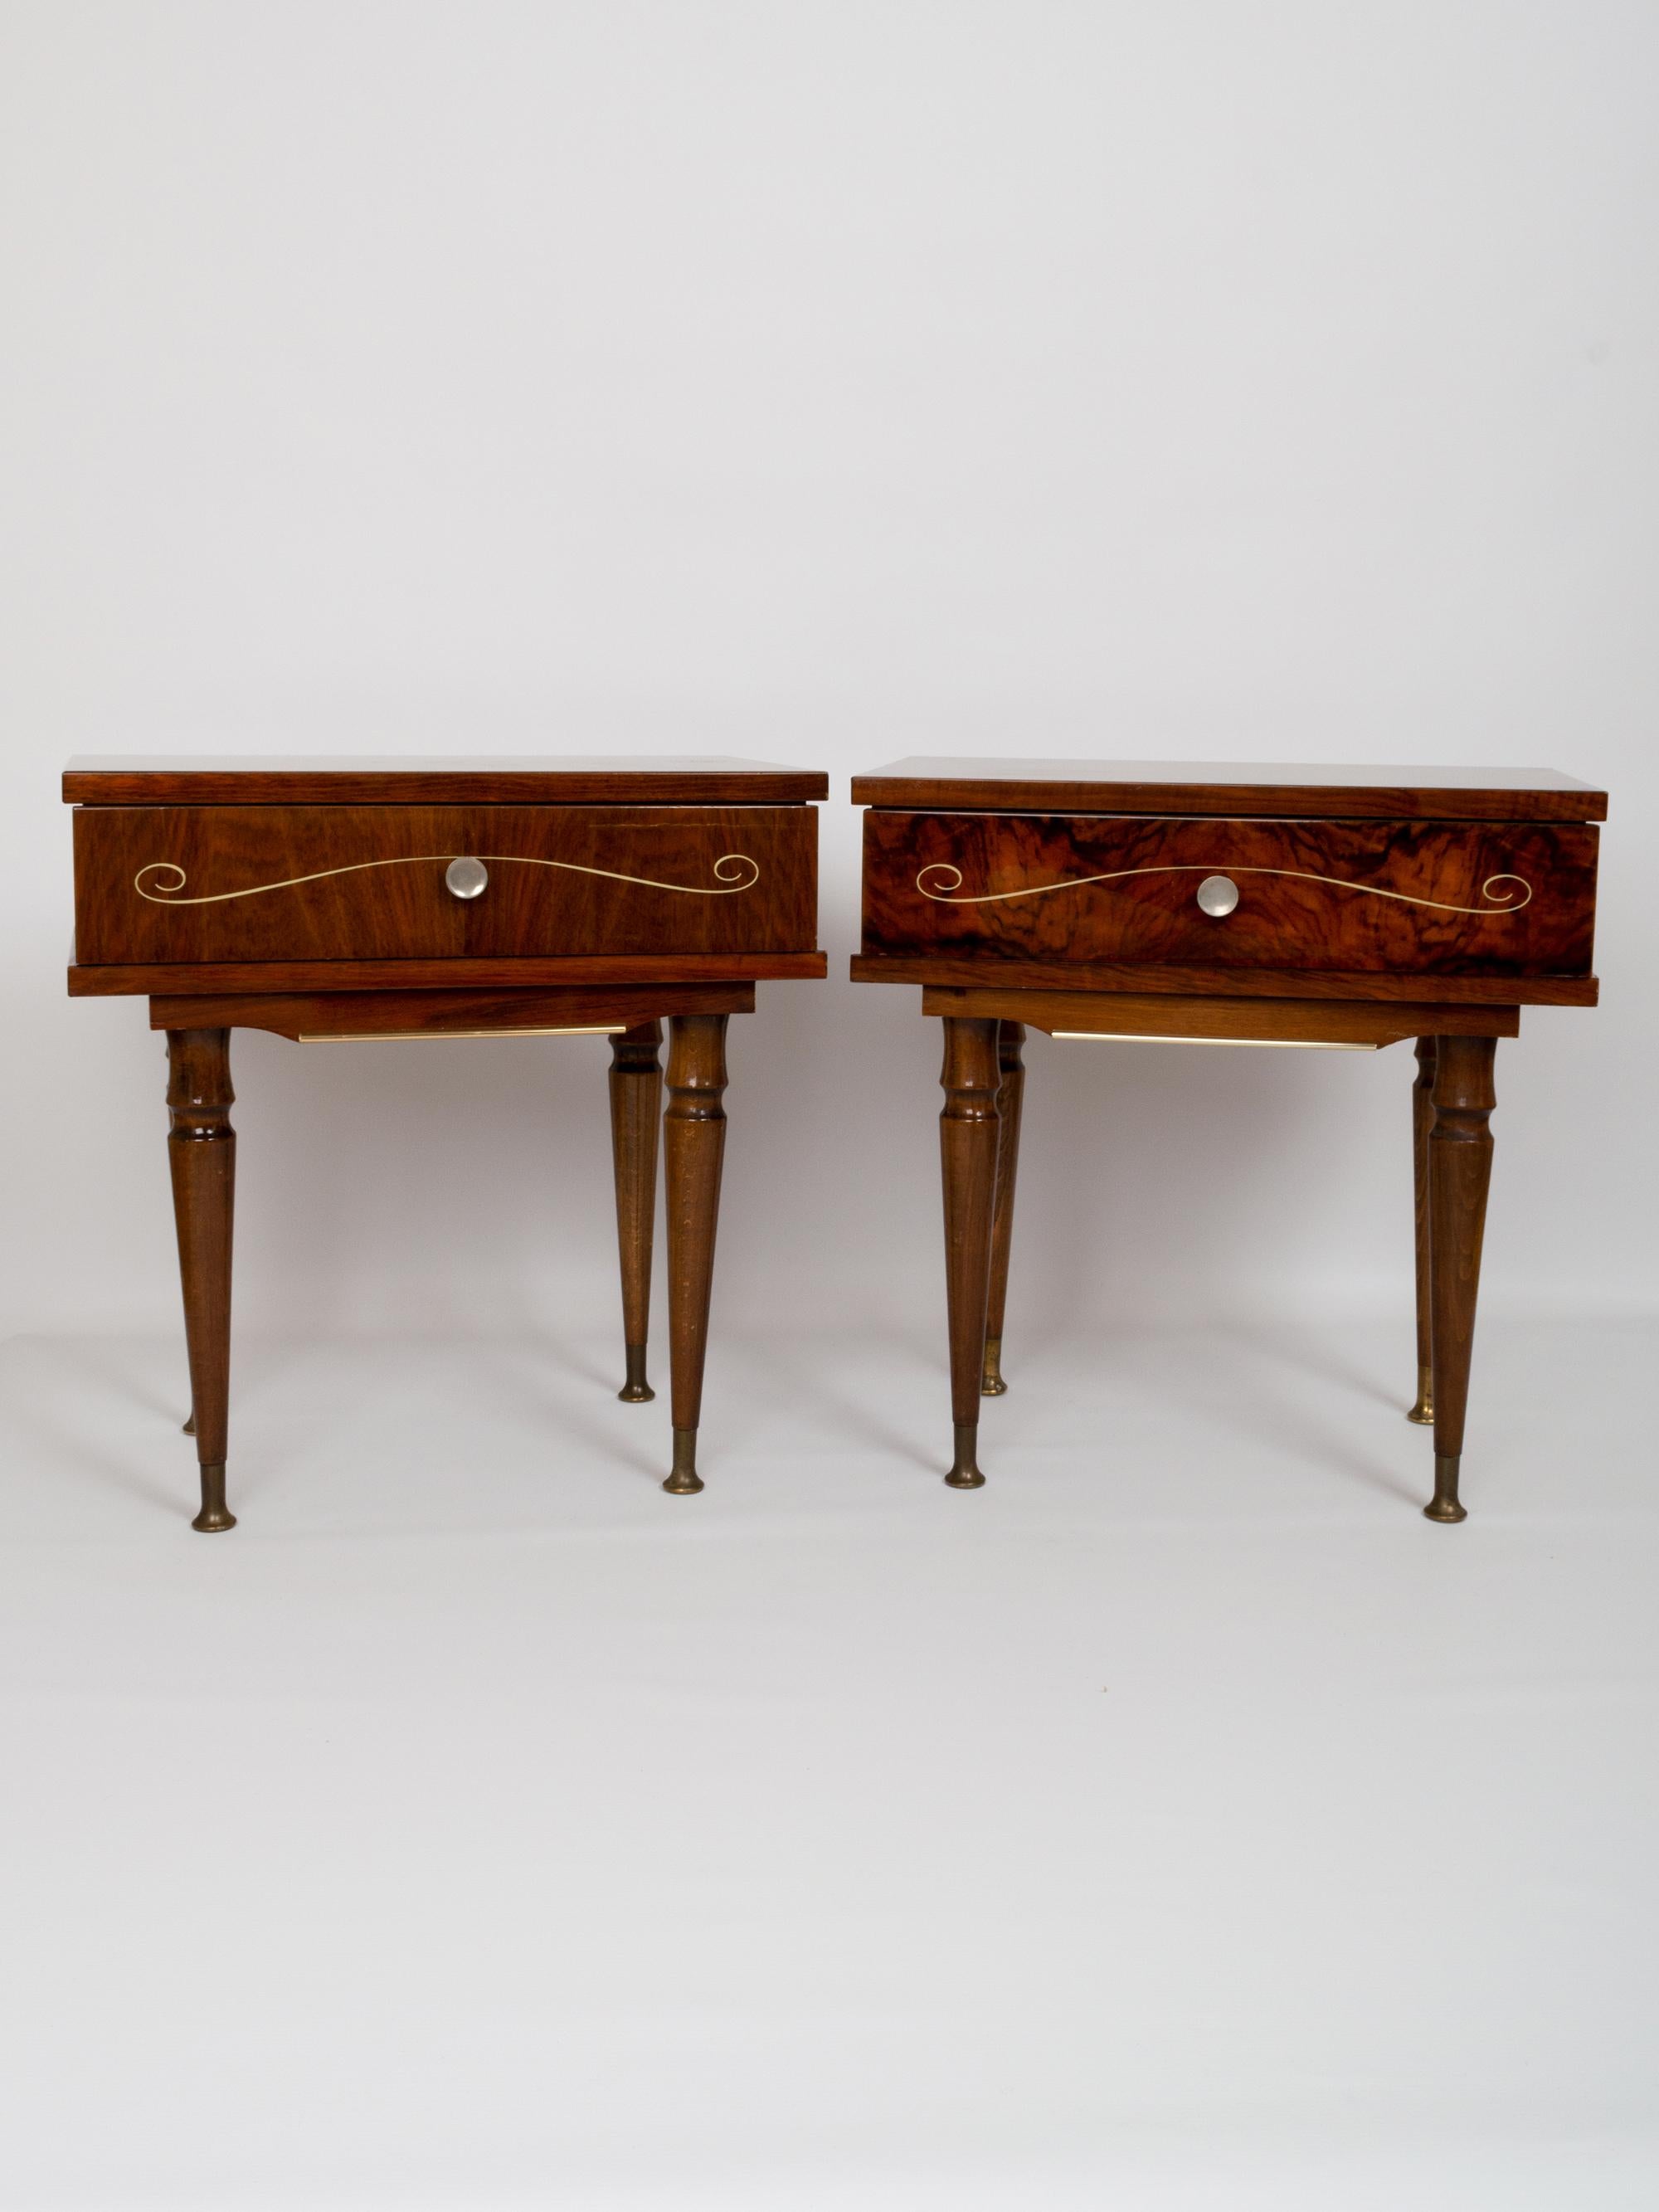 Pair of French Art Deco Figured Walnut Nightstands Bedside Cabinets, circa 1960 For Sale 4